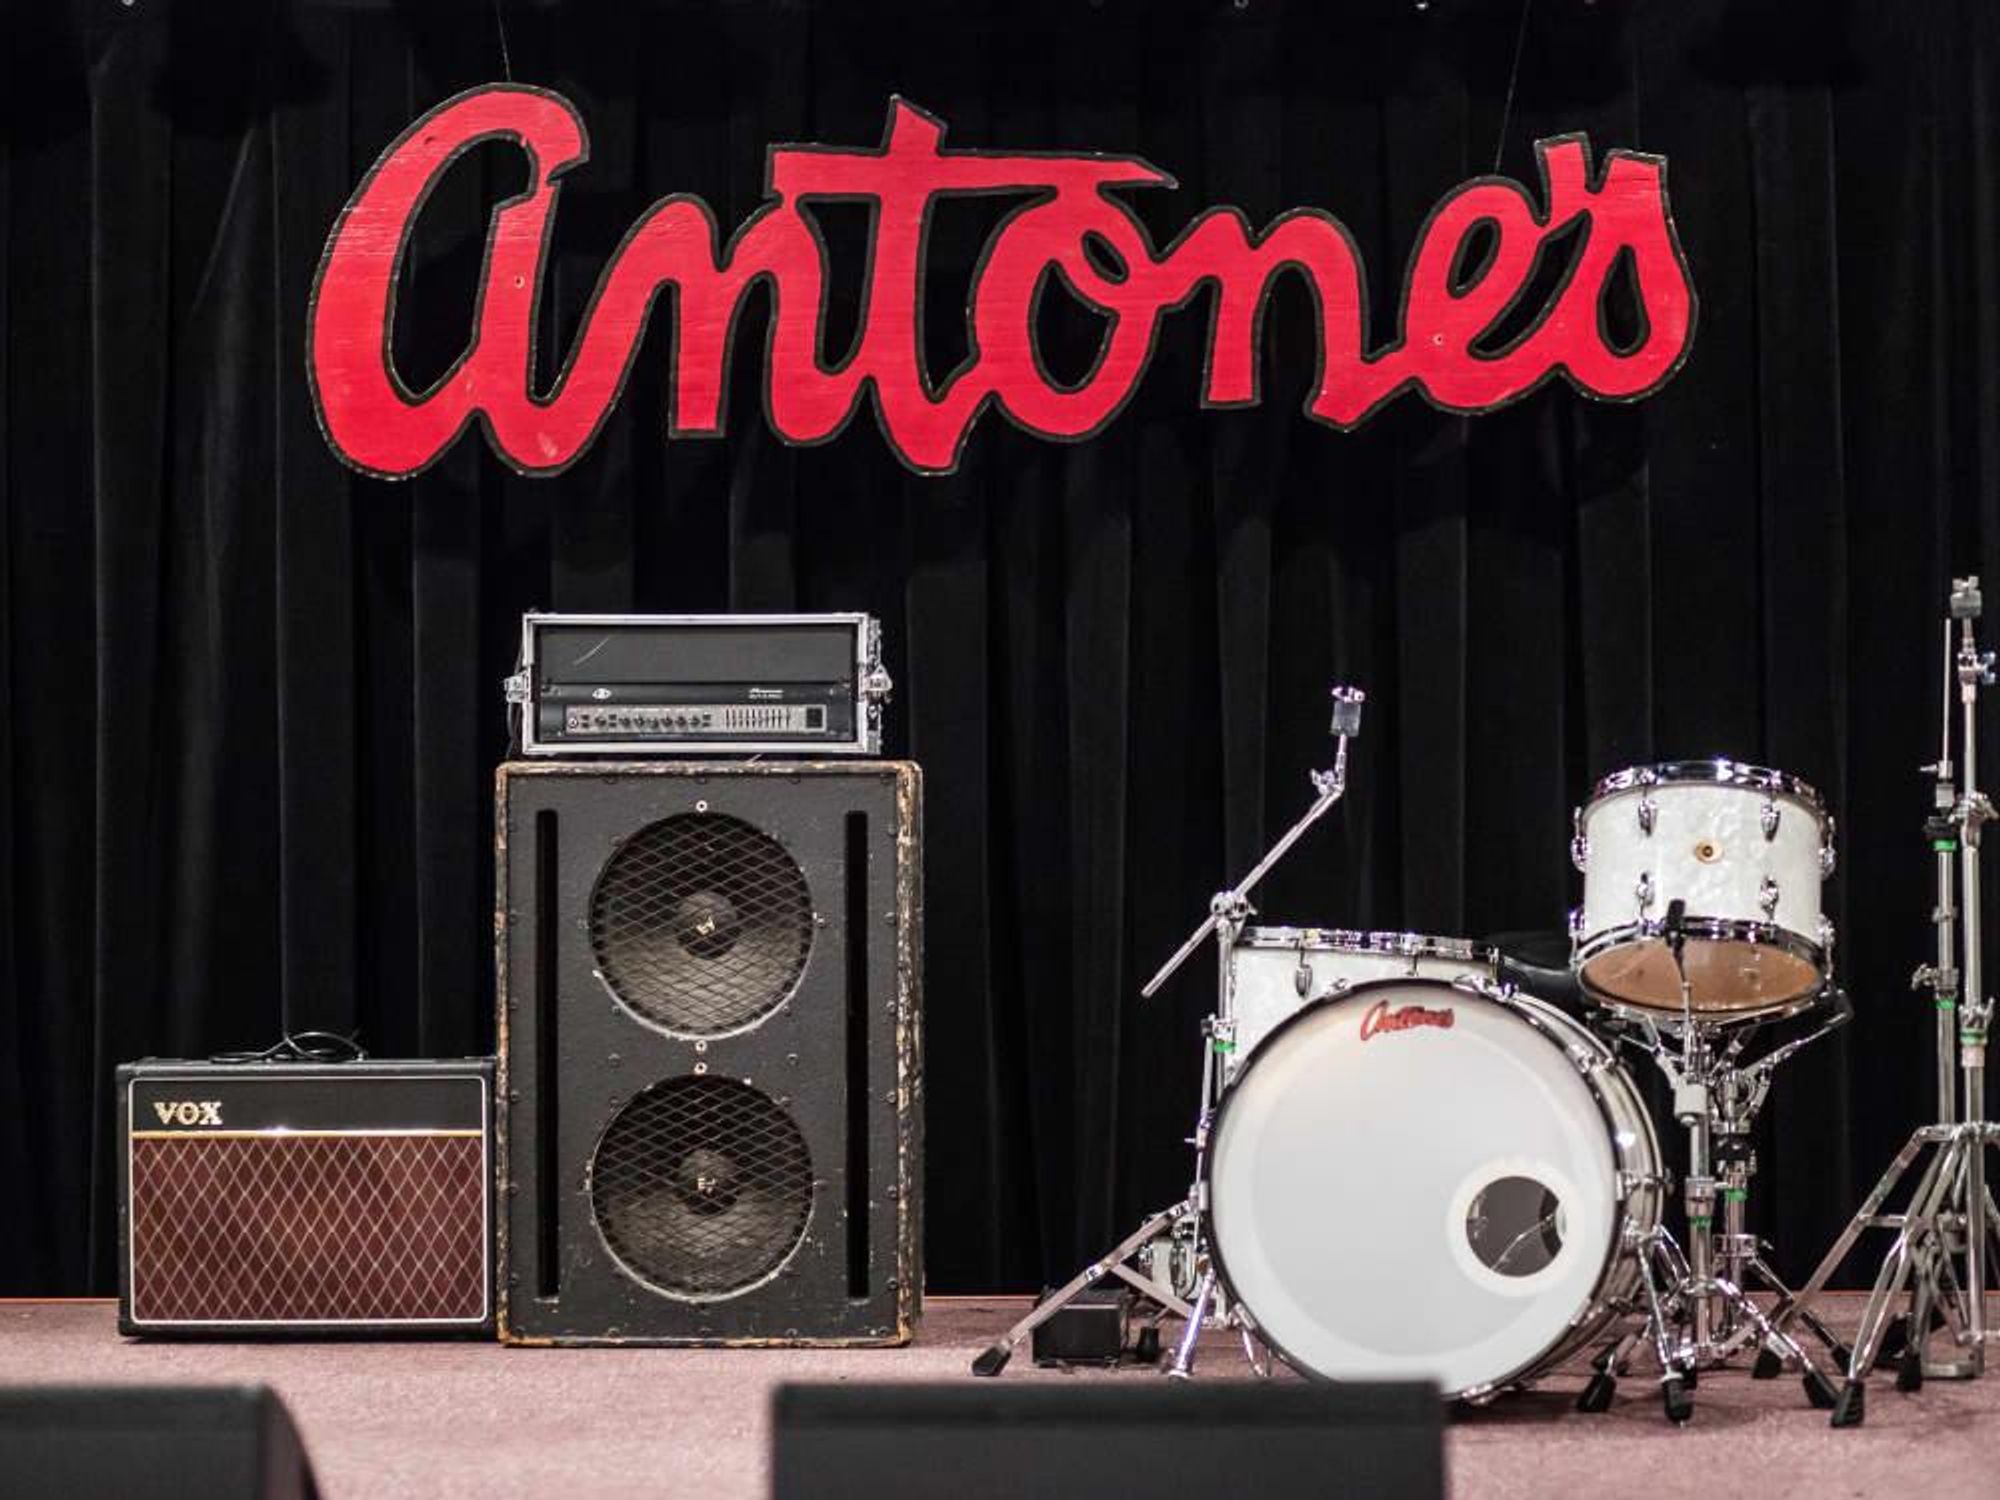 Antone's downtown venue Fifth Street 2016 stage logo